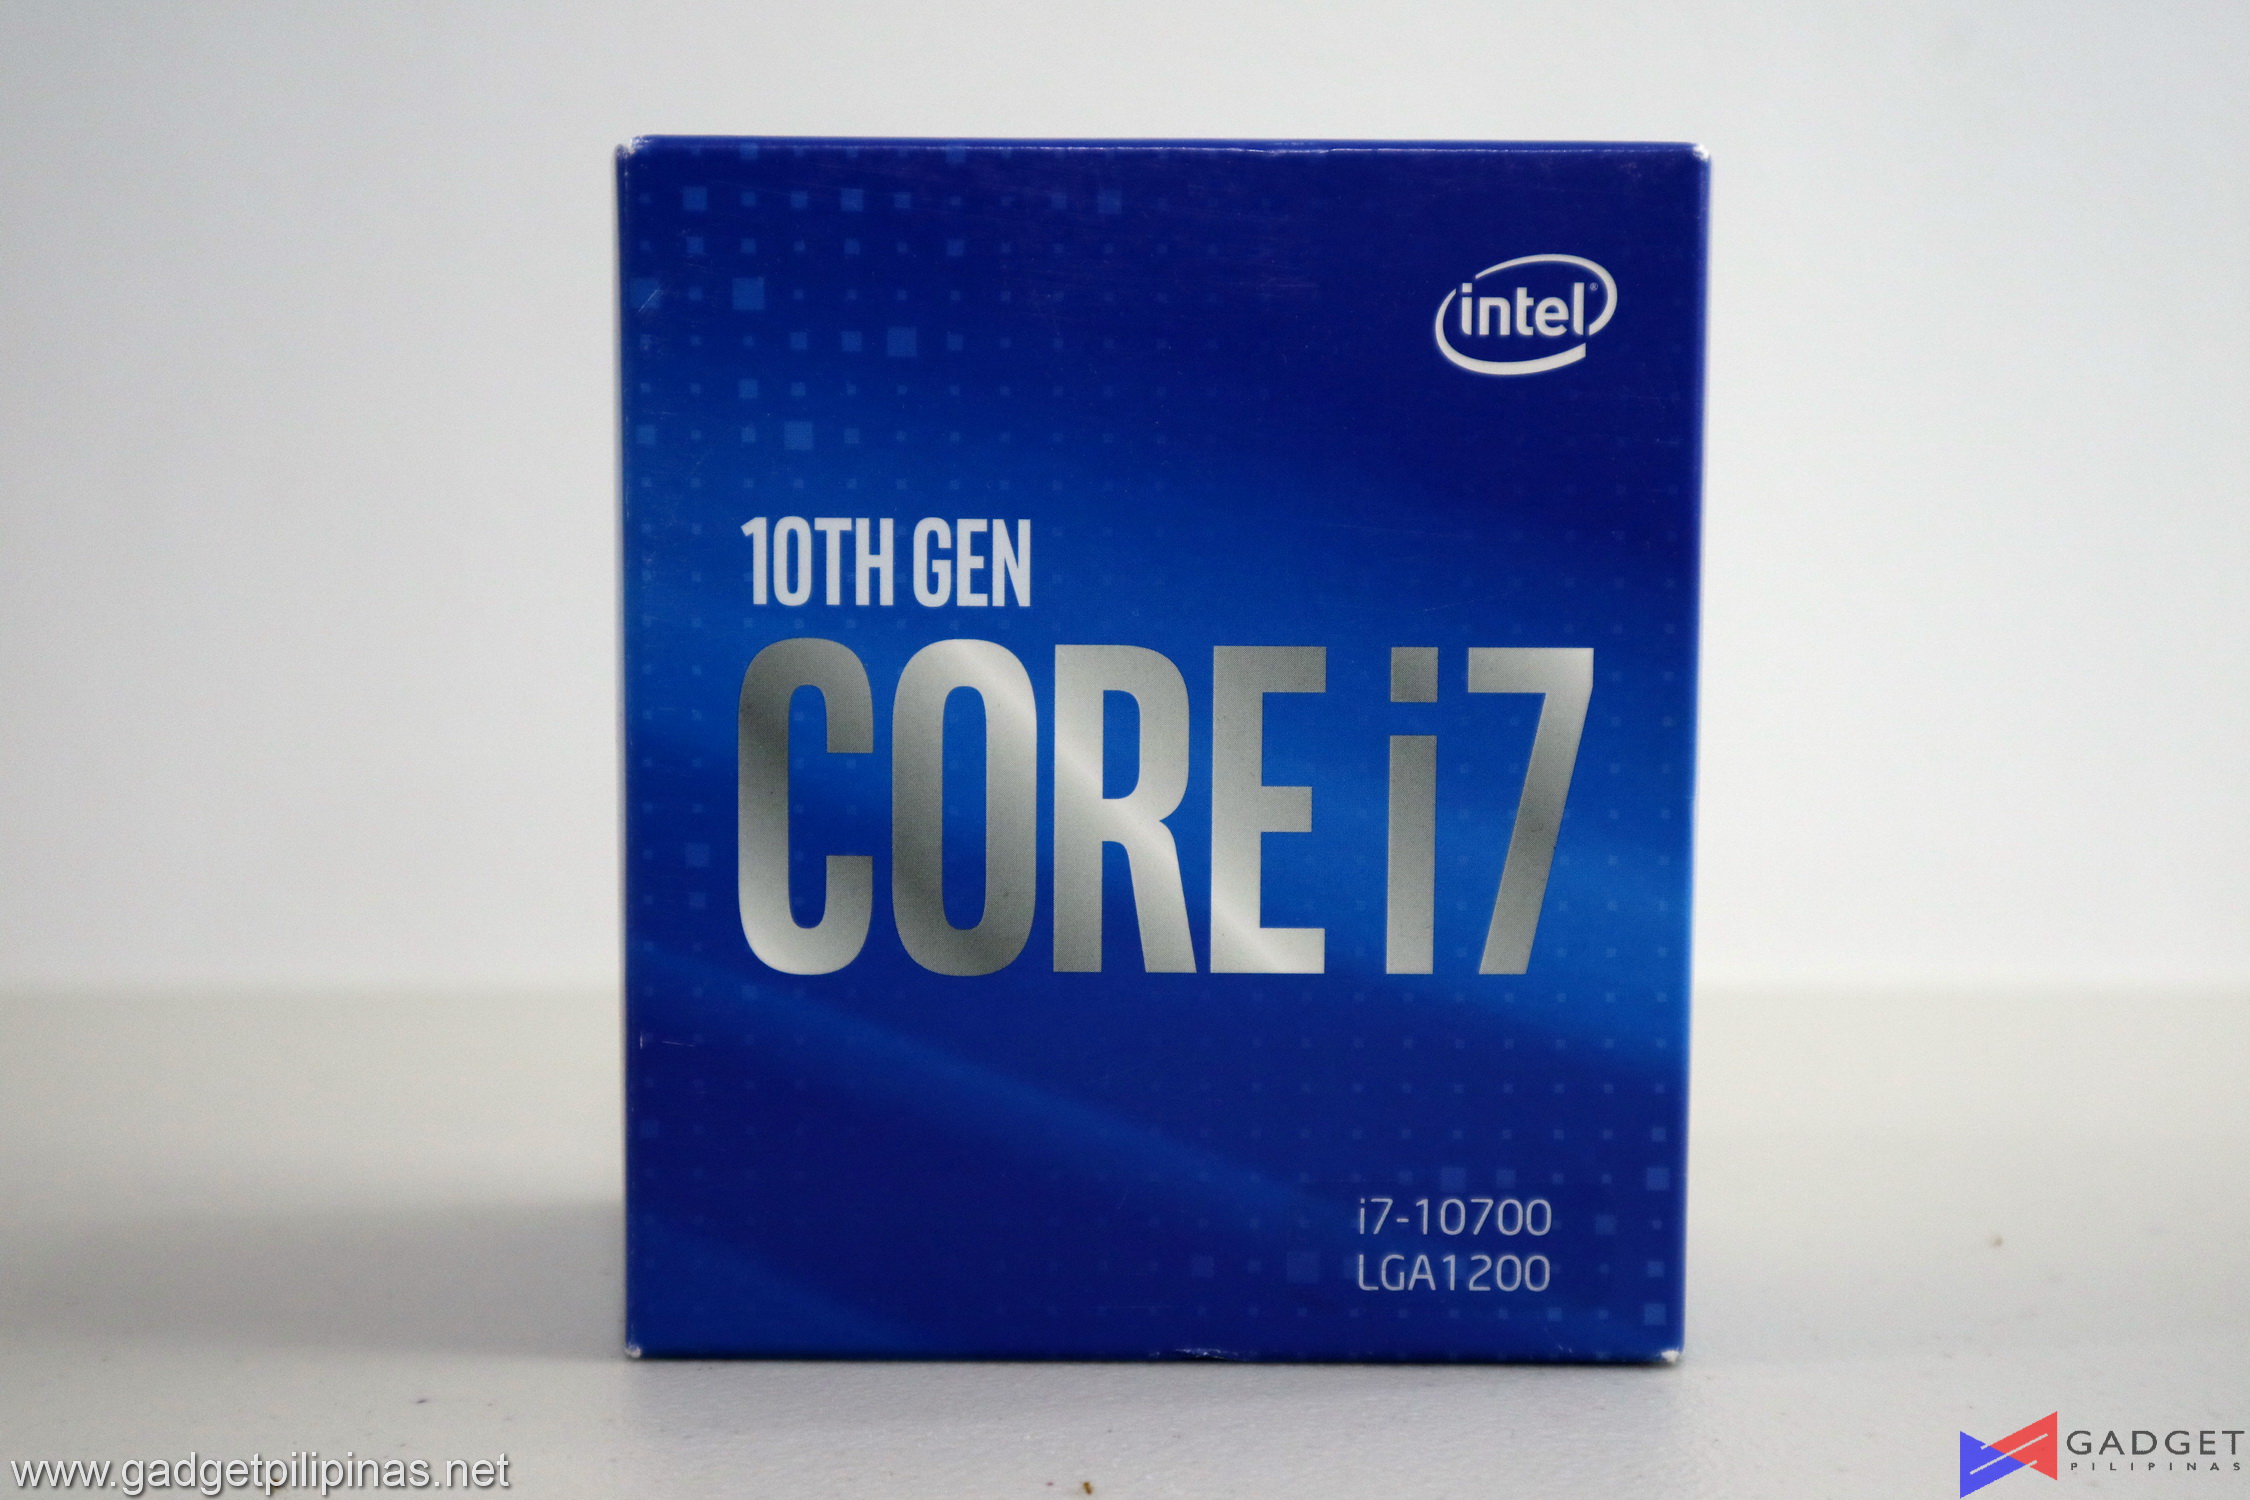 Intel Core i7 10700 Review - Performance On A Budget - Gadget